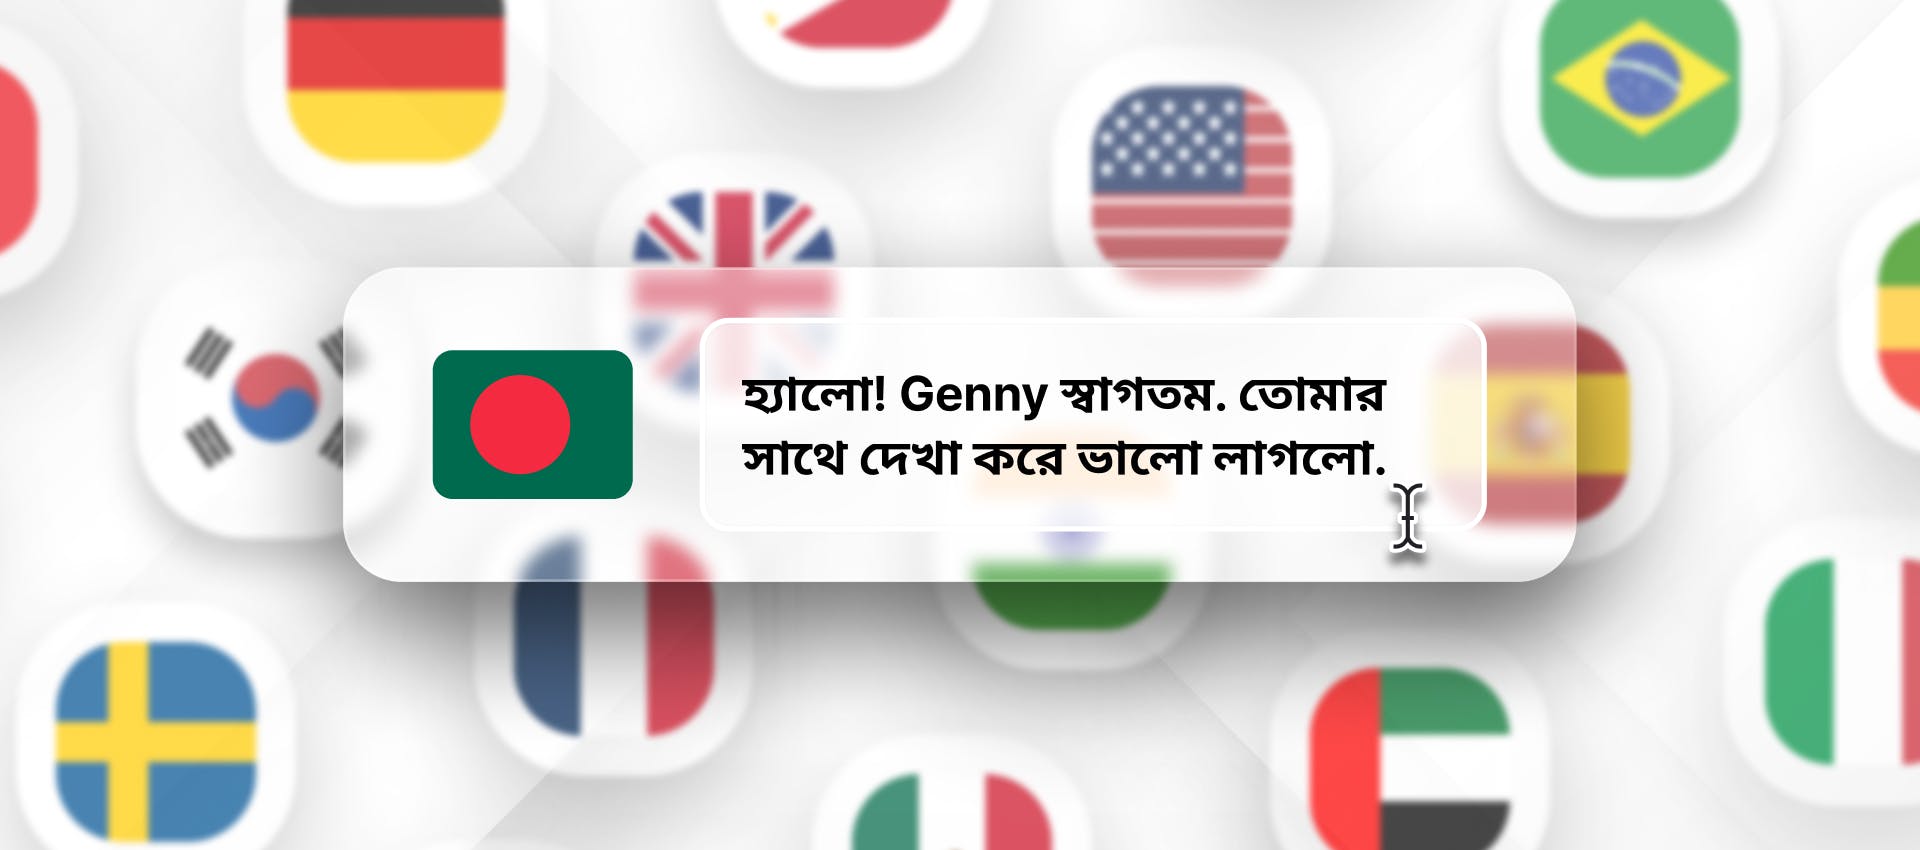 Bangla phrase for Bangla TTS generation with different flags in the background